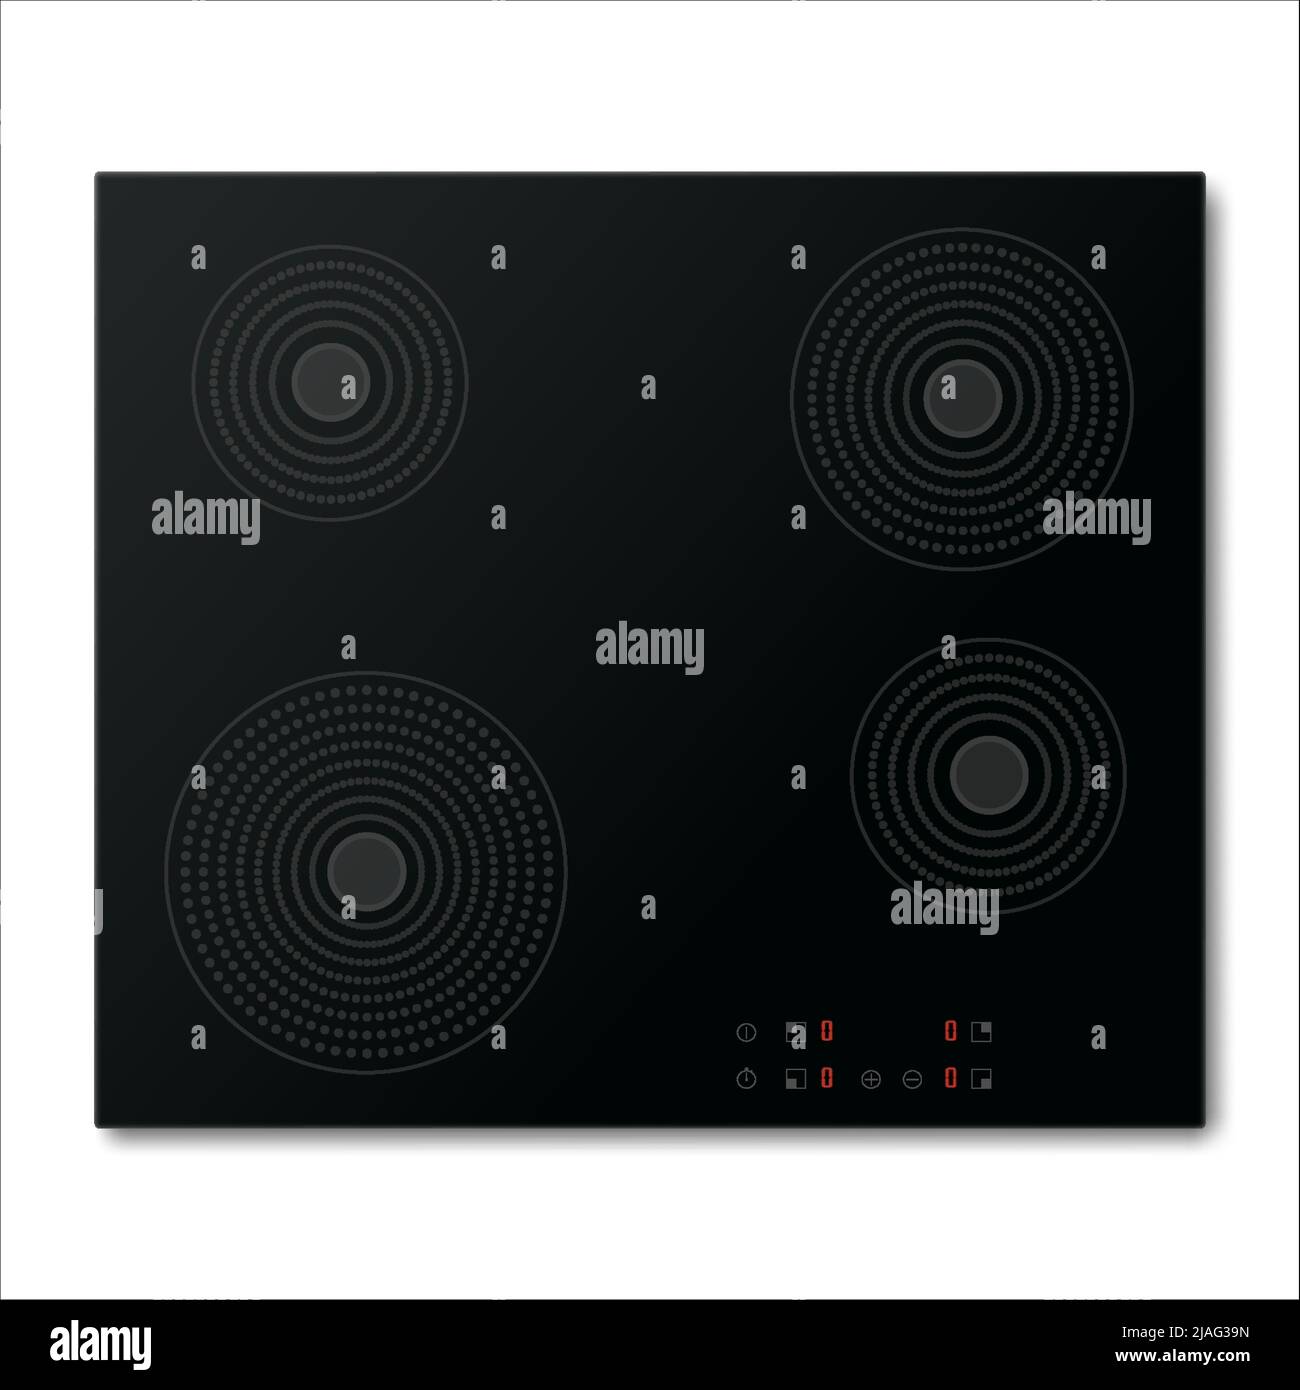 Electric stove induction cooktop with four power boost burners. Domestic equipment. Realistic smooth surface ceramic black glass. Electric hob. Top vi Stock Vector